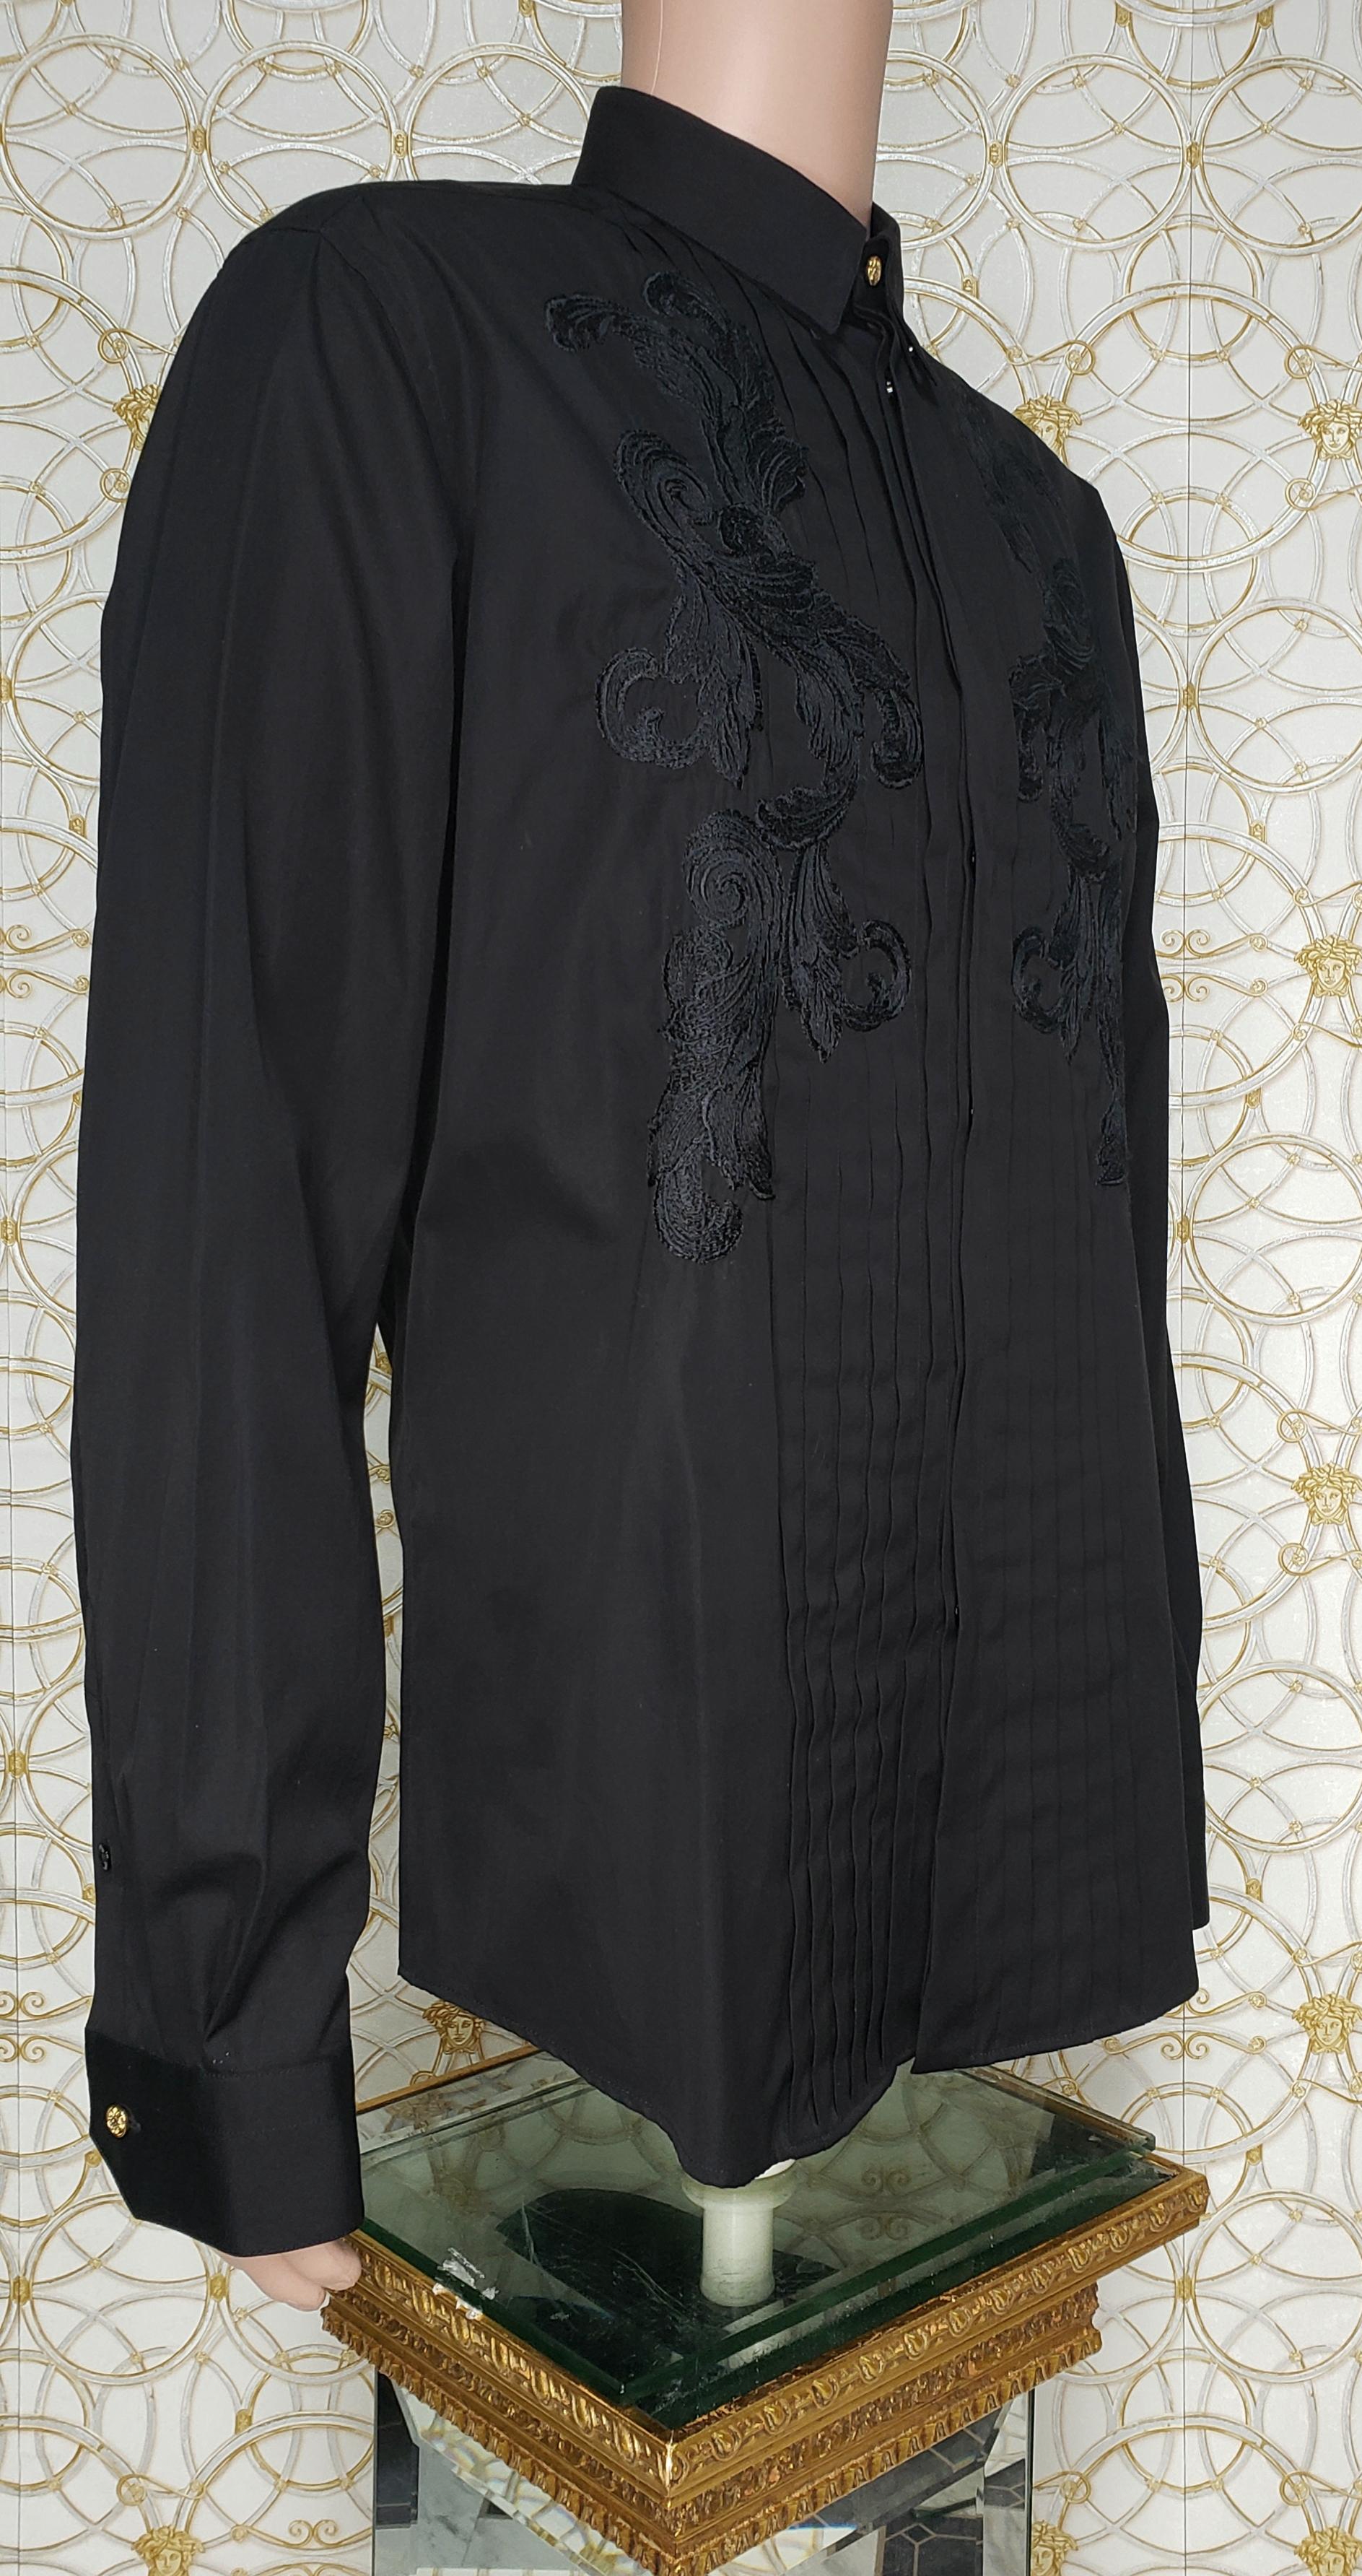 Black VERSACE BLACK COTTON SHIRT with EMBROIDERED PRINT IT 52 - XL